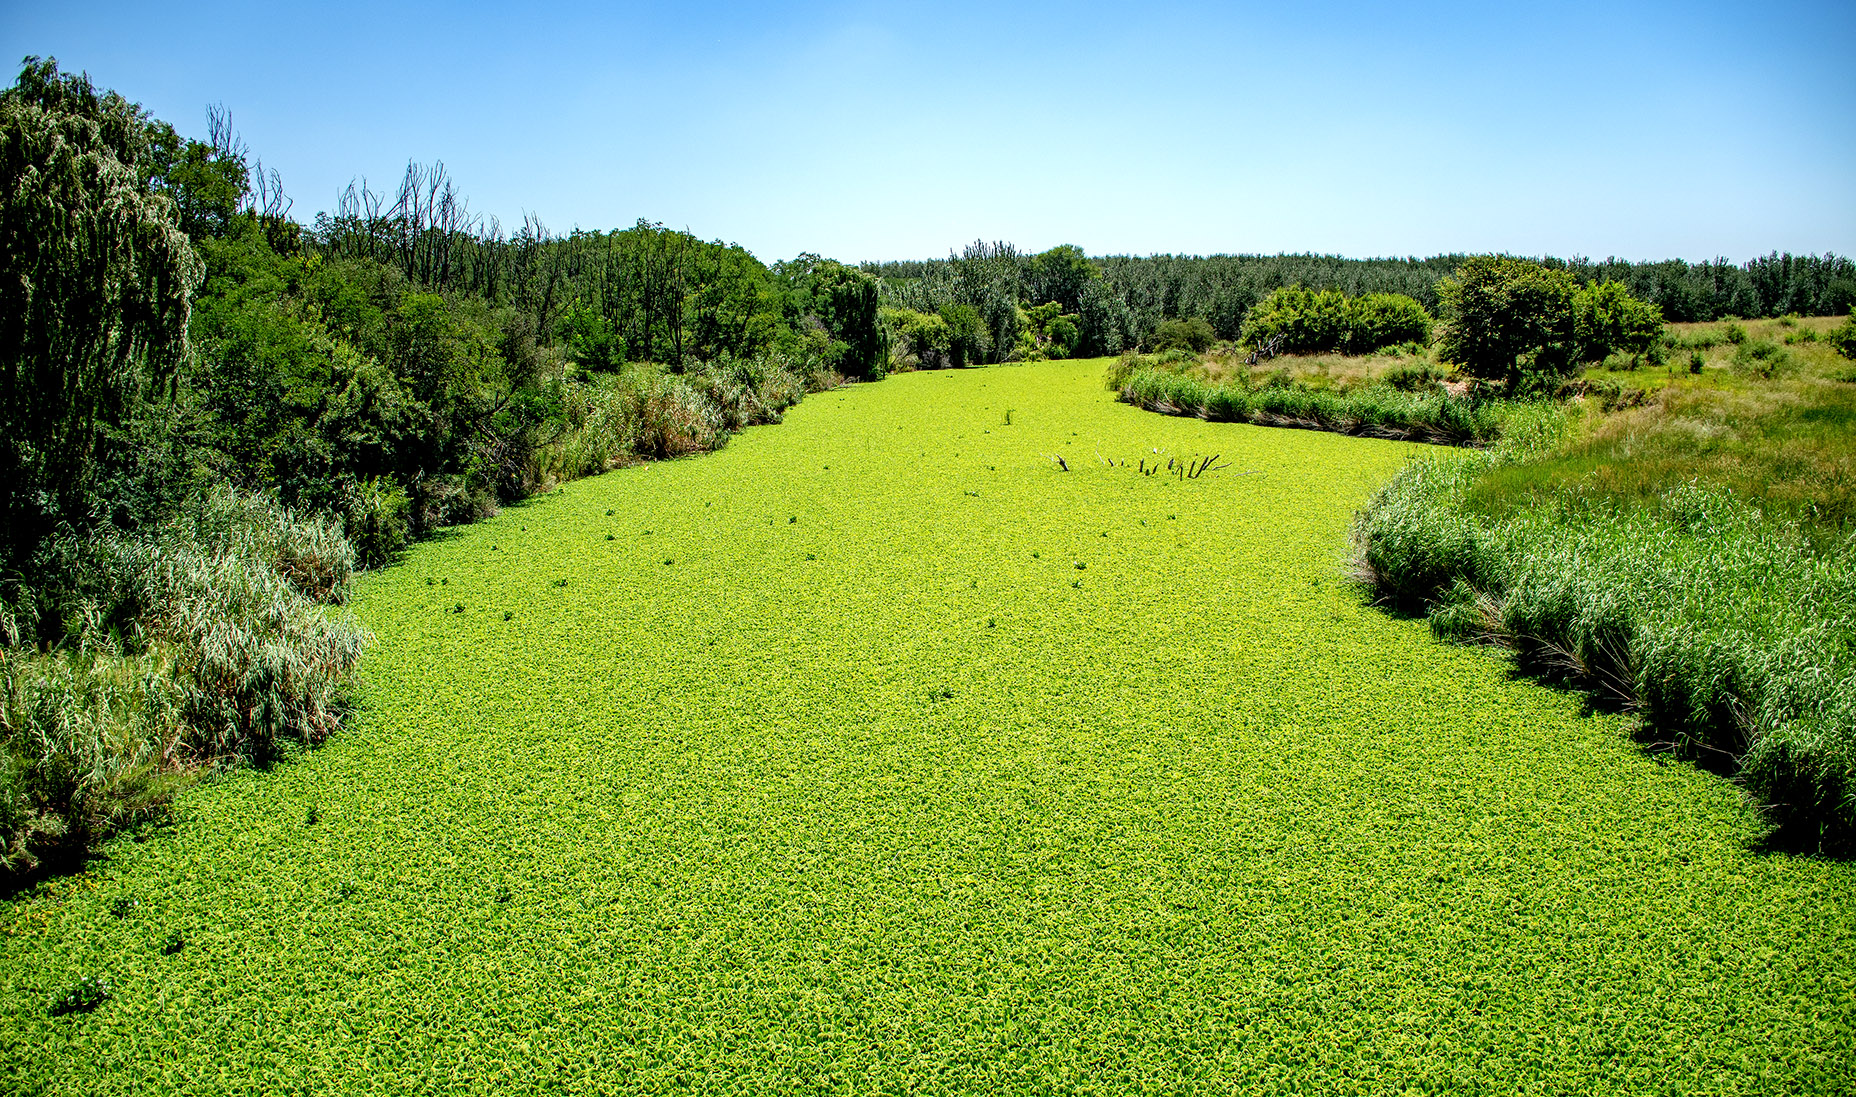 spraying of controversial herbicide on vaal river water lettuce begins – critics urge caution